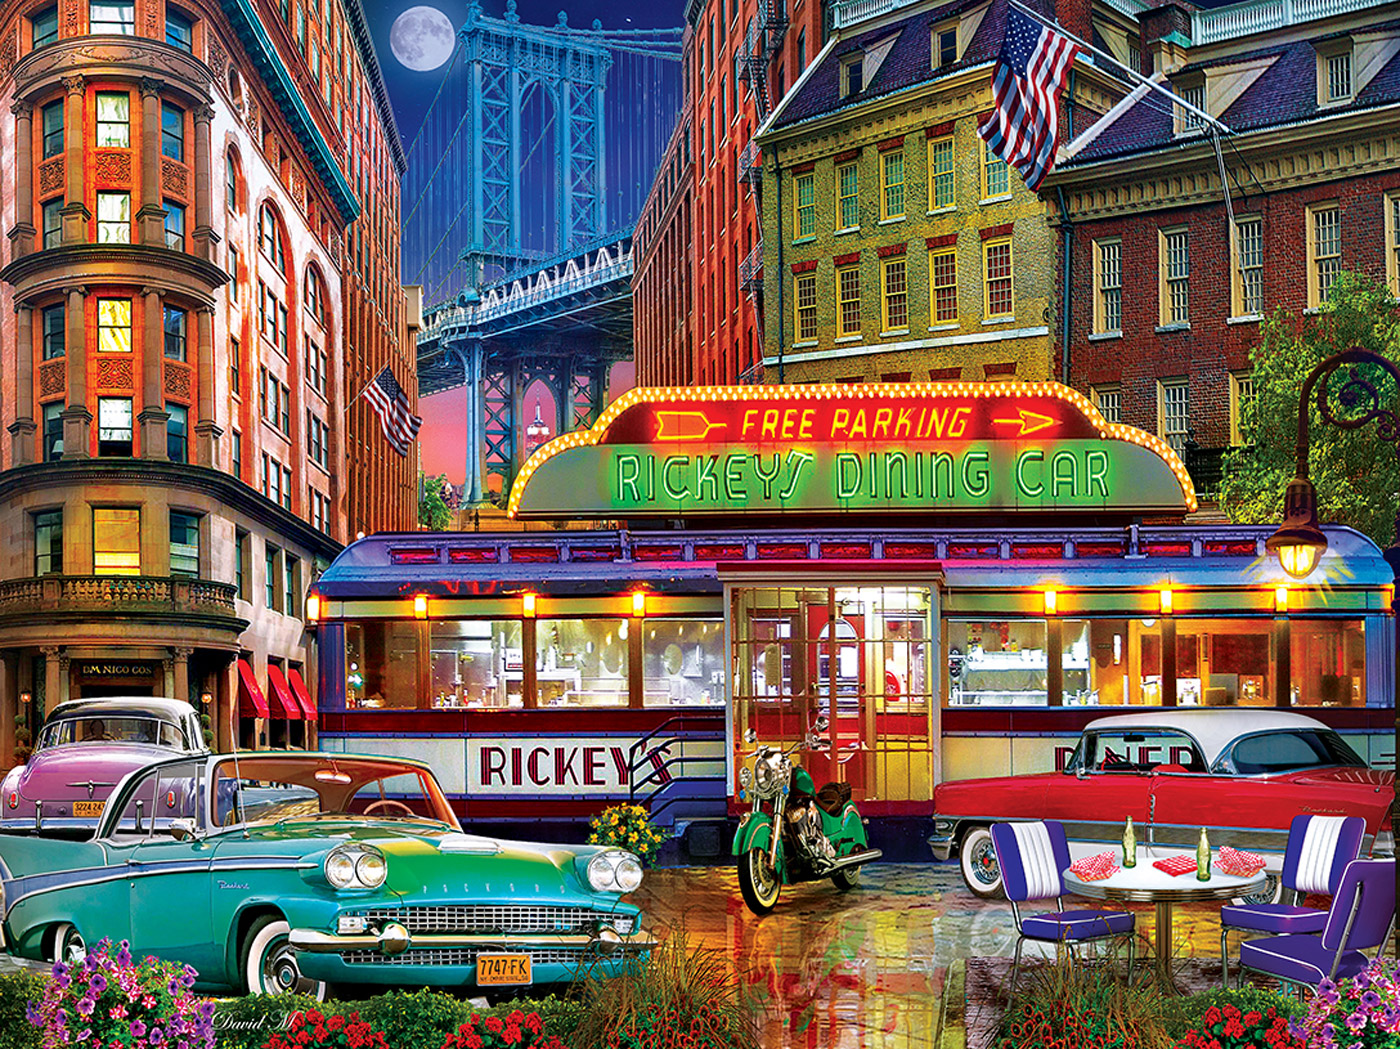 Rickey's Diner Car Food and Drink Jigsaw Puzzle